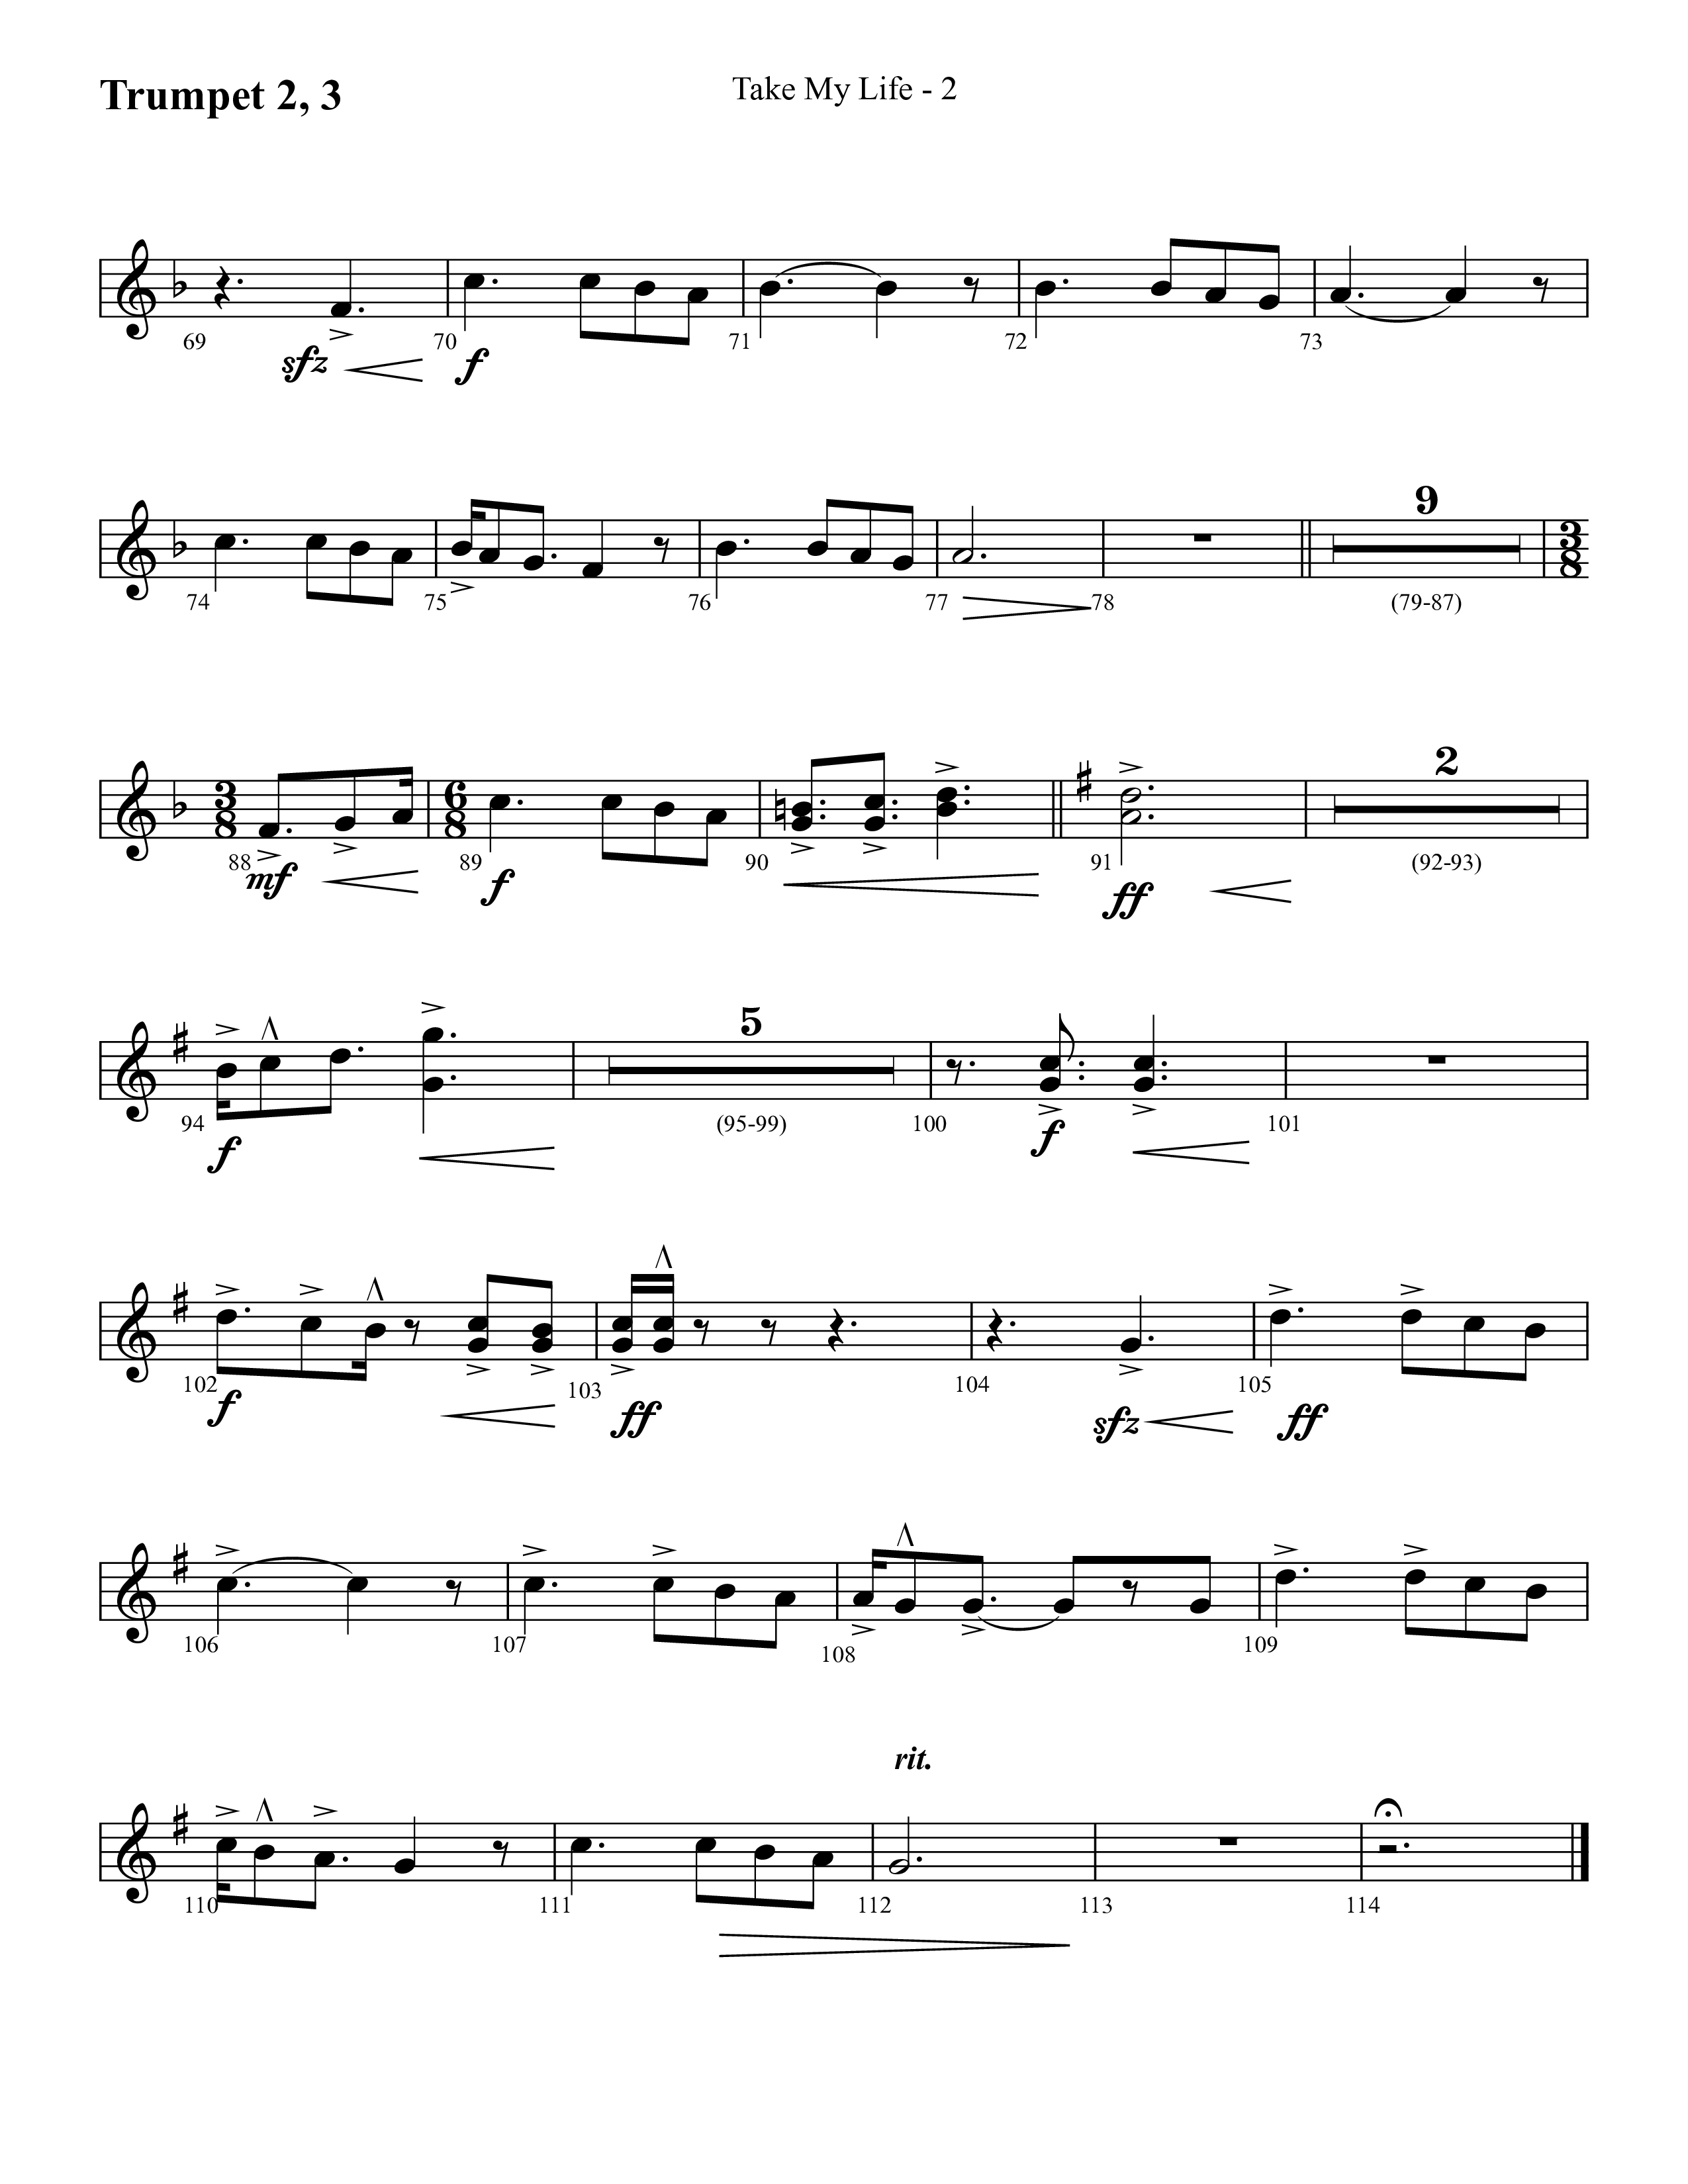 Take My Life (with Take My Life And Let It Be, Take My Life) (Choral Anthem SATB) Trumpet 2/3 (Lifeway Choral / Arr. Cliff Duren)